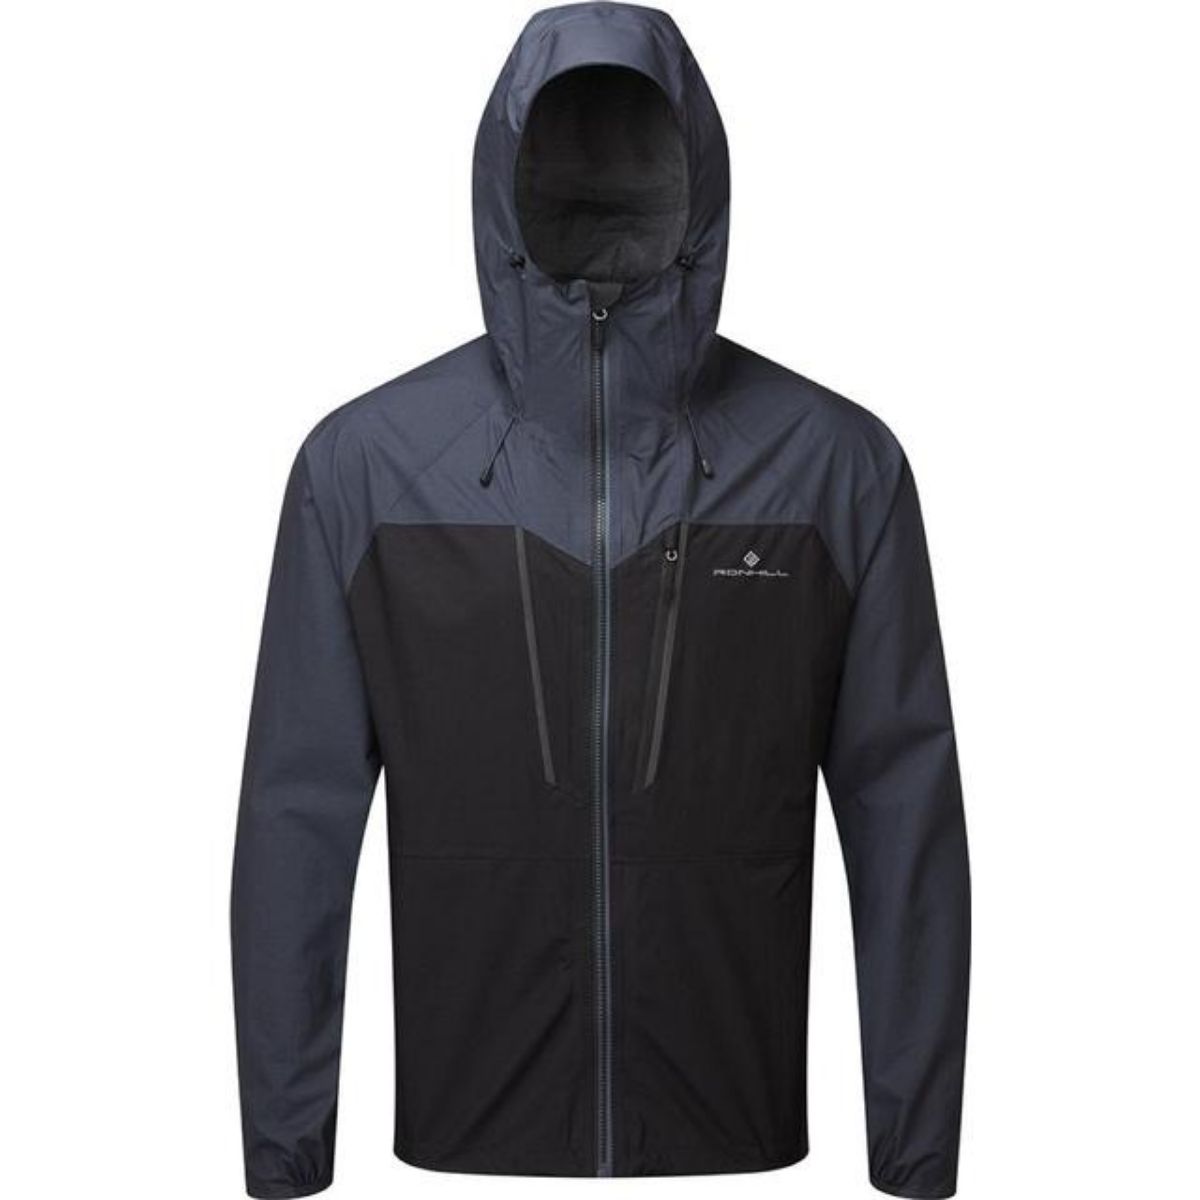 ron-hill-mens-tech-fortify-jacket-blackcharcoal